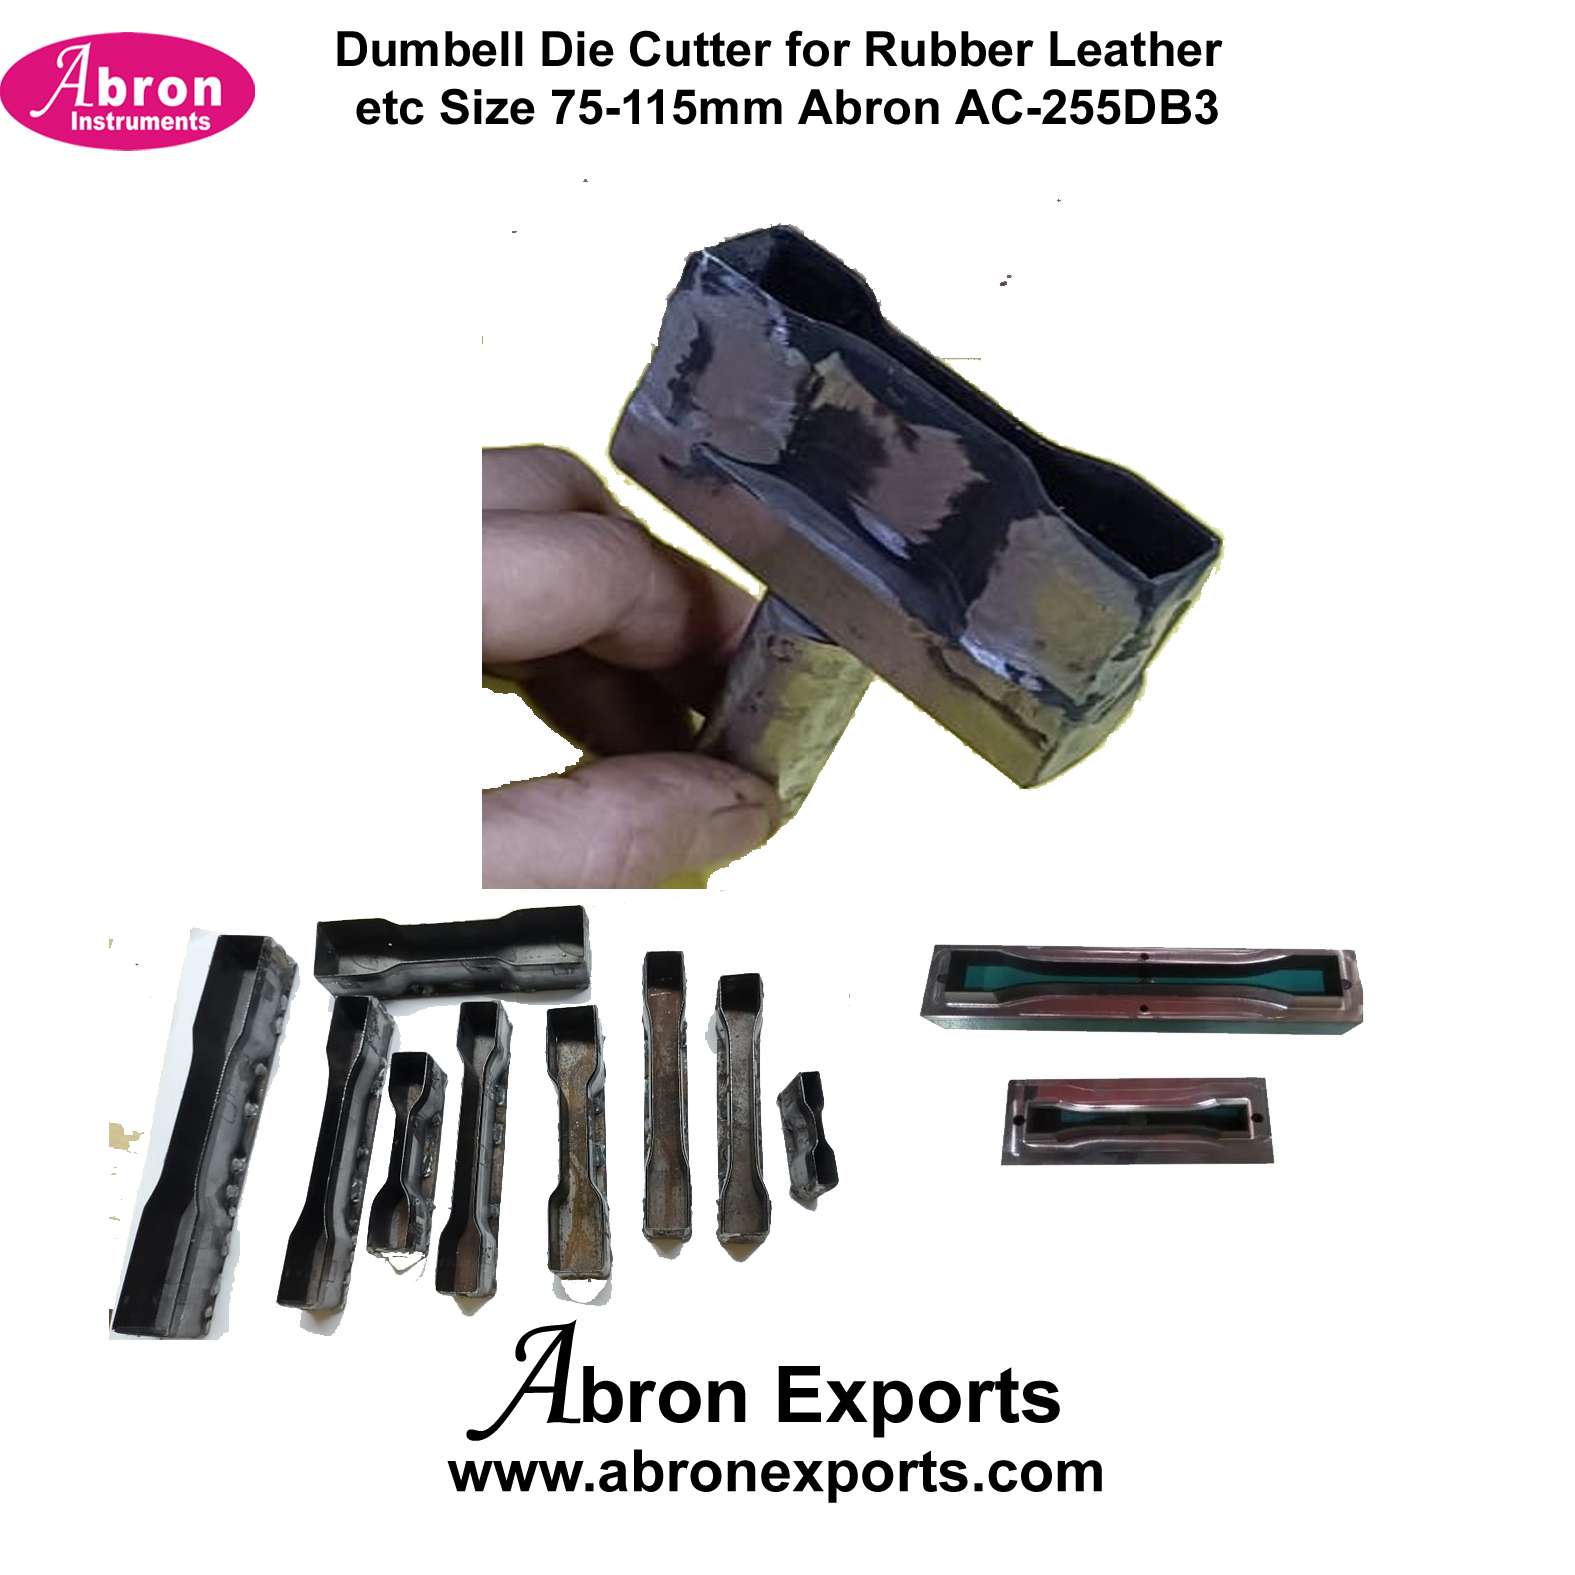 Dumbell Die Cutter for Rubber Leather etc size 75-115mm Abron ASI-255DB3 